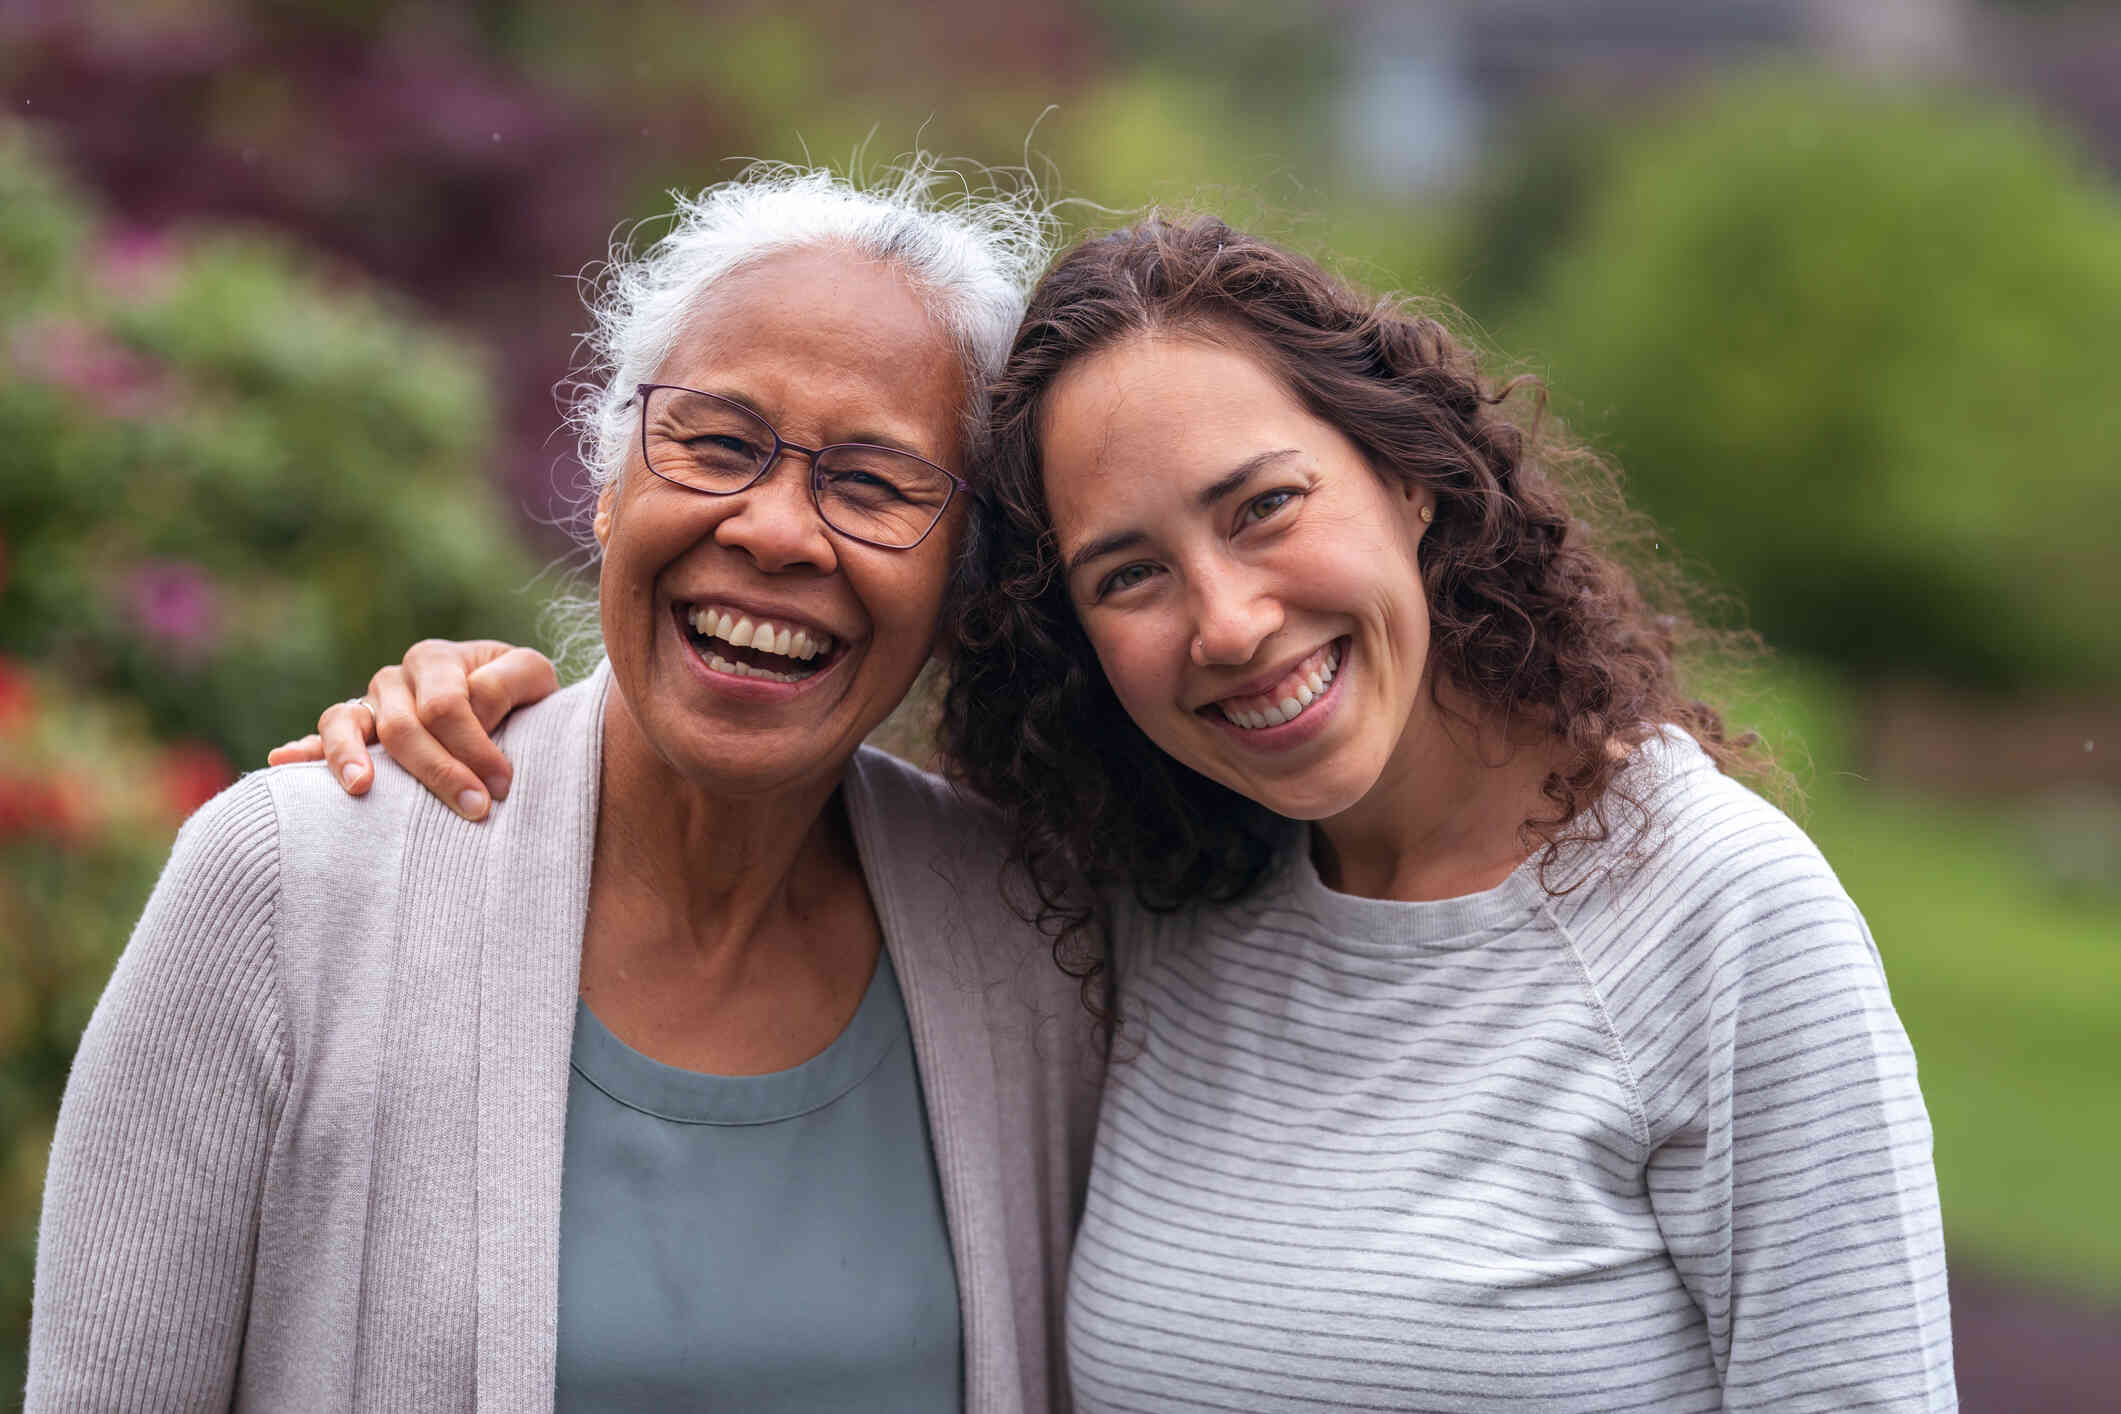 A woman wraps her arm around an older womans shoulder as they both smile and look at the camera.